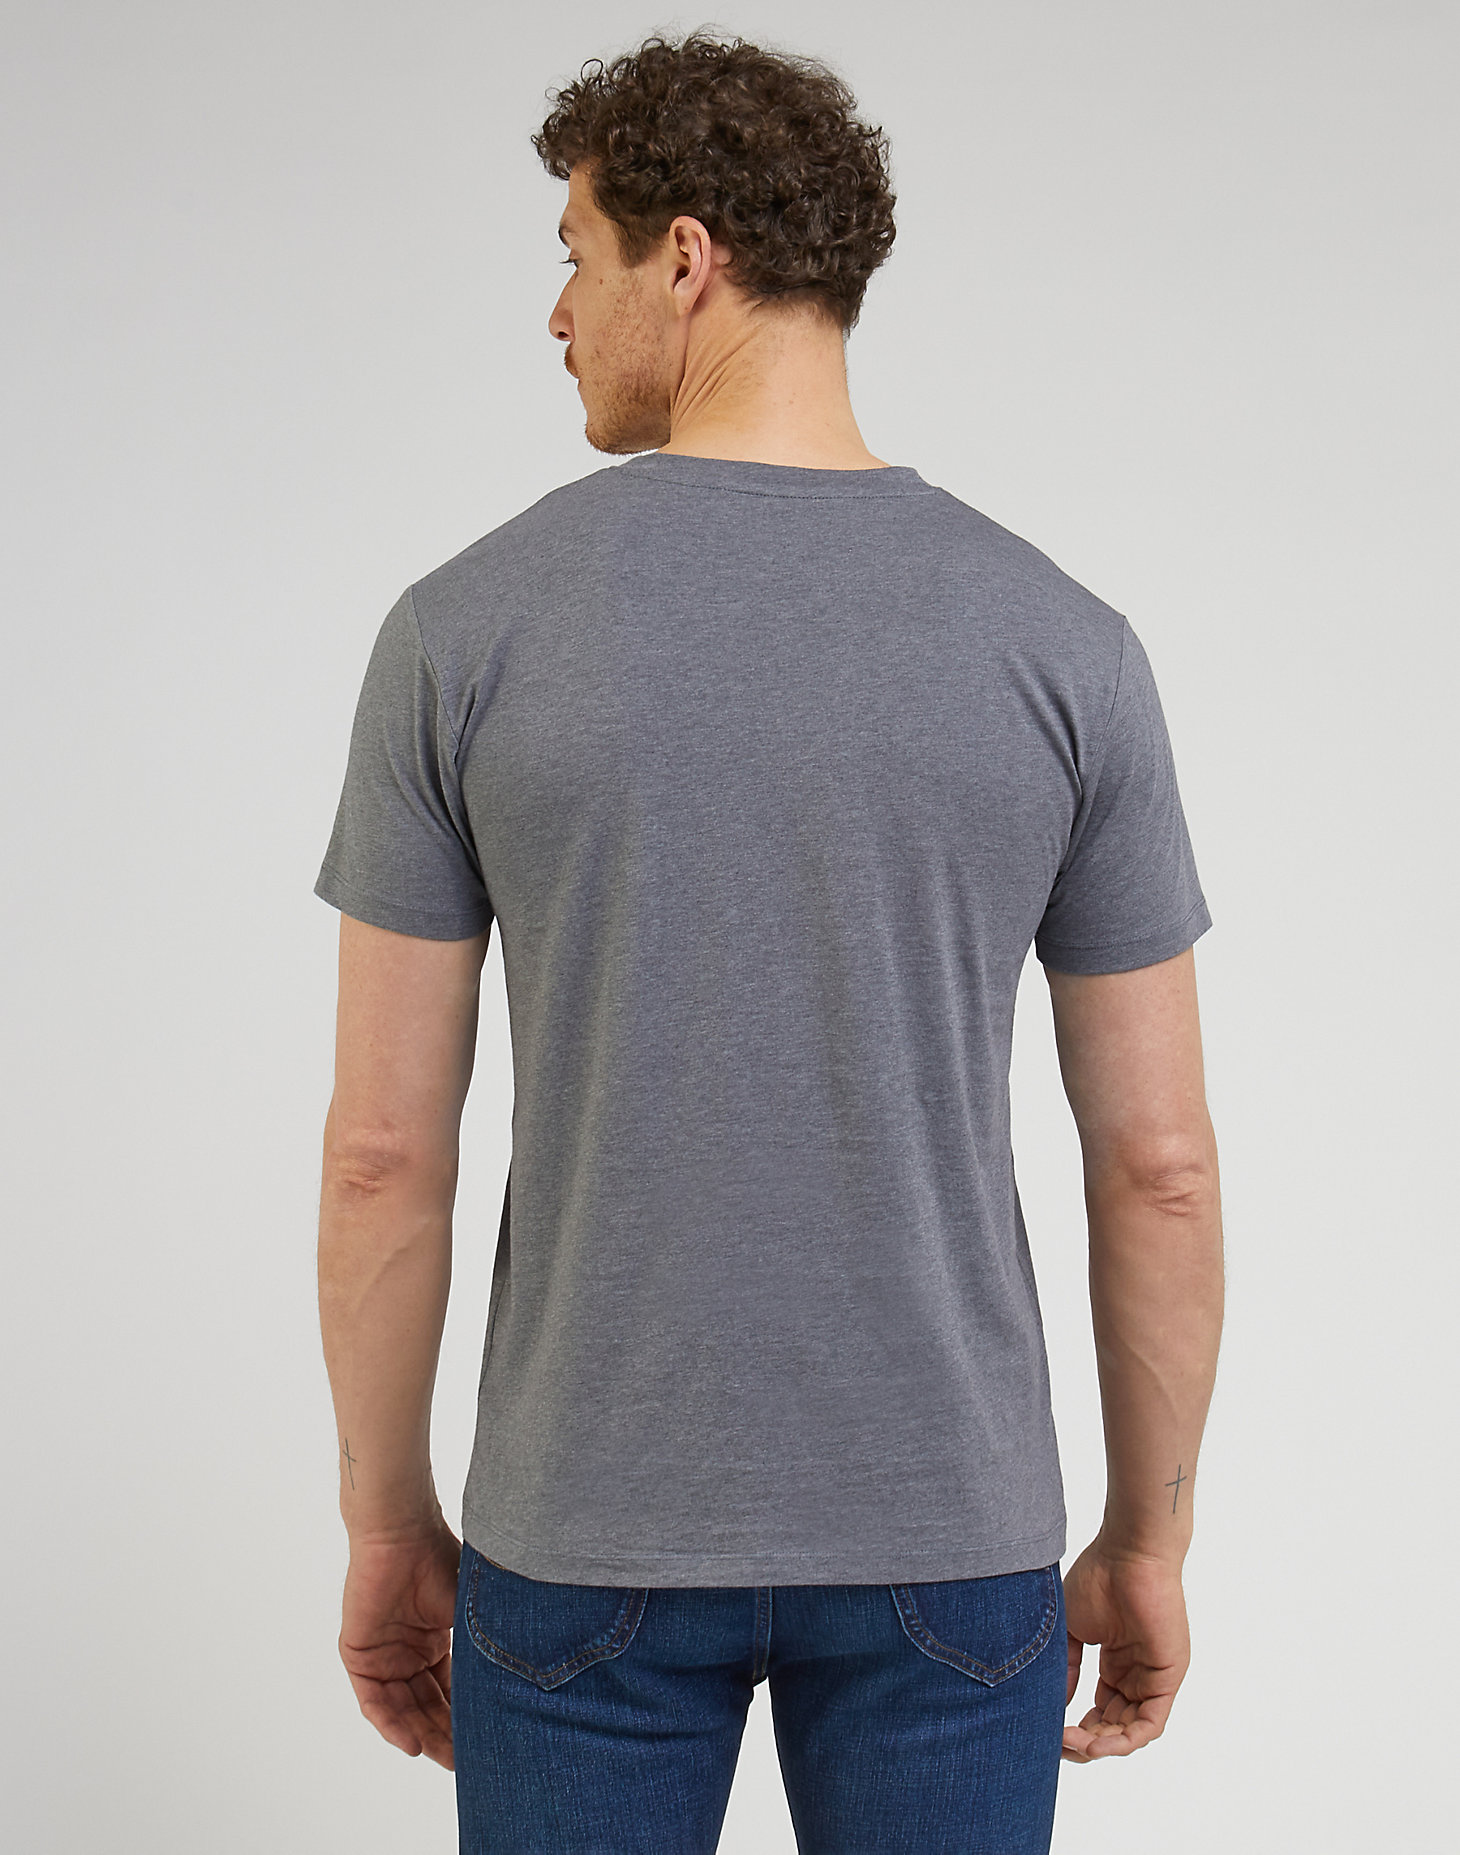 Ultimate Pocket Tee in Taint Grey alternative view 1